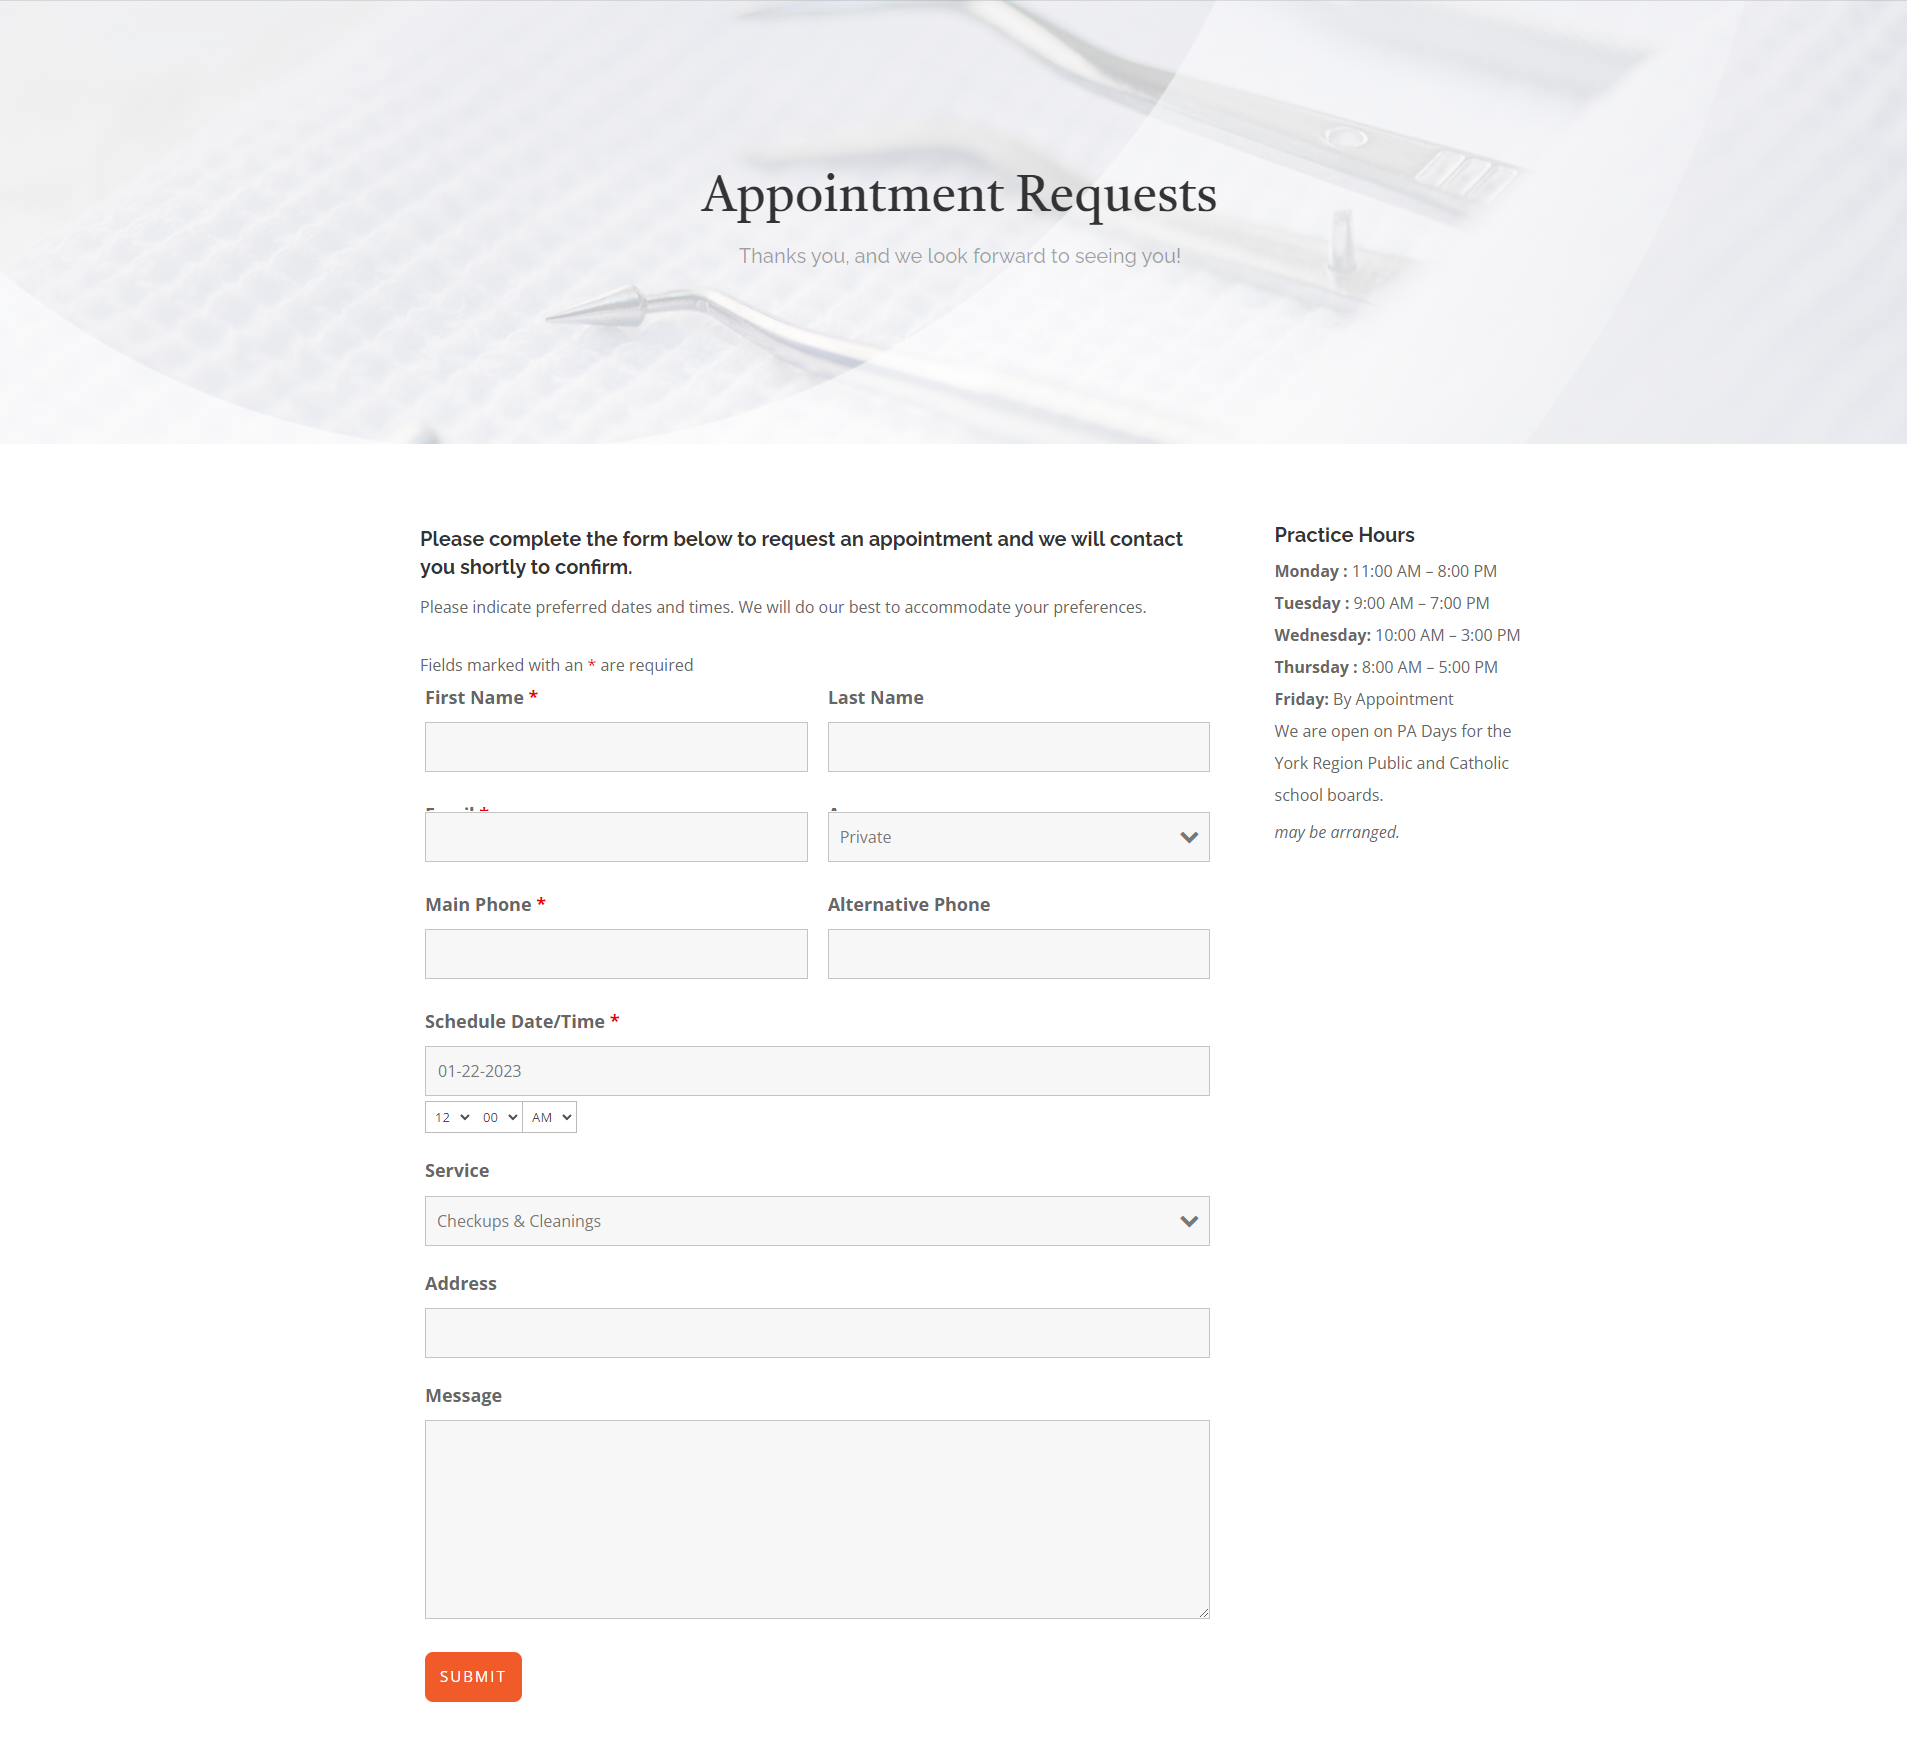 Appointment booking page of a dental office